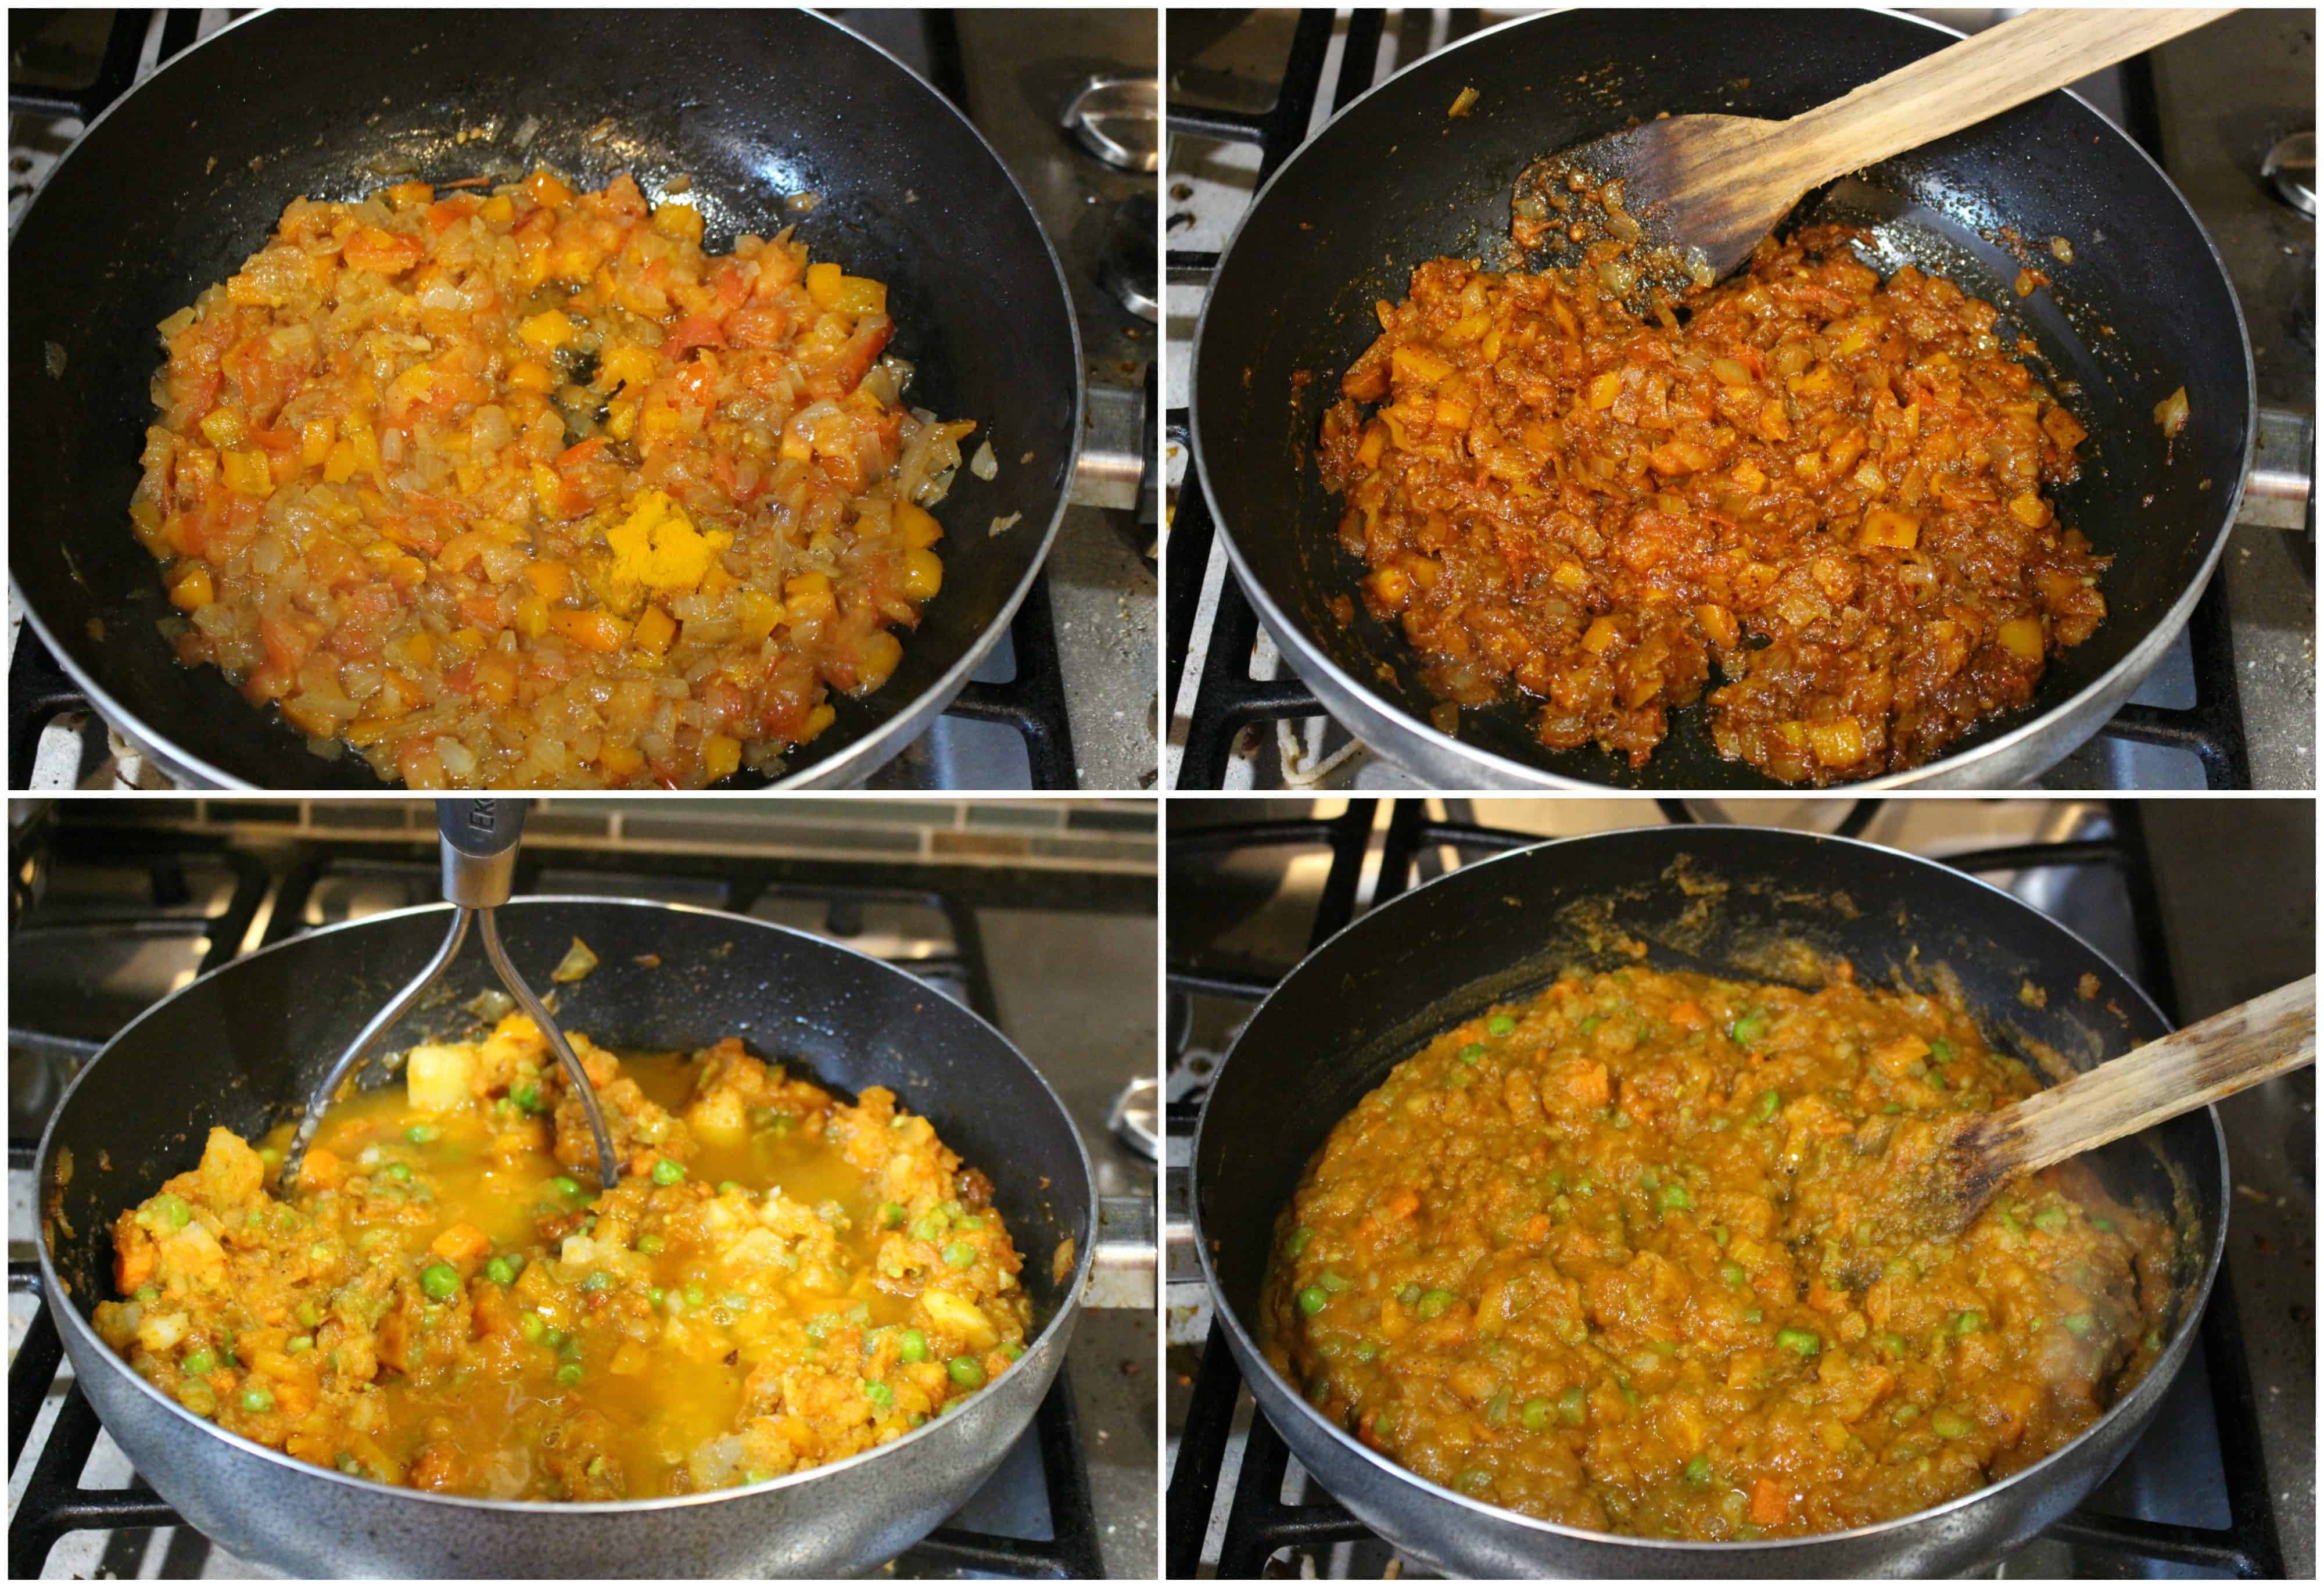 Mixing Bhaji and cooking with spices.